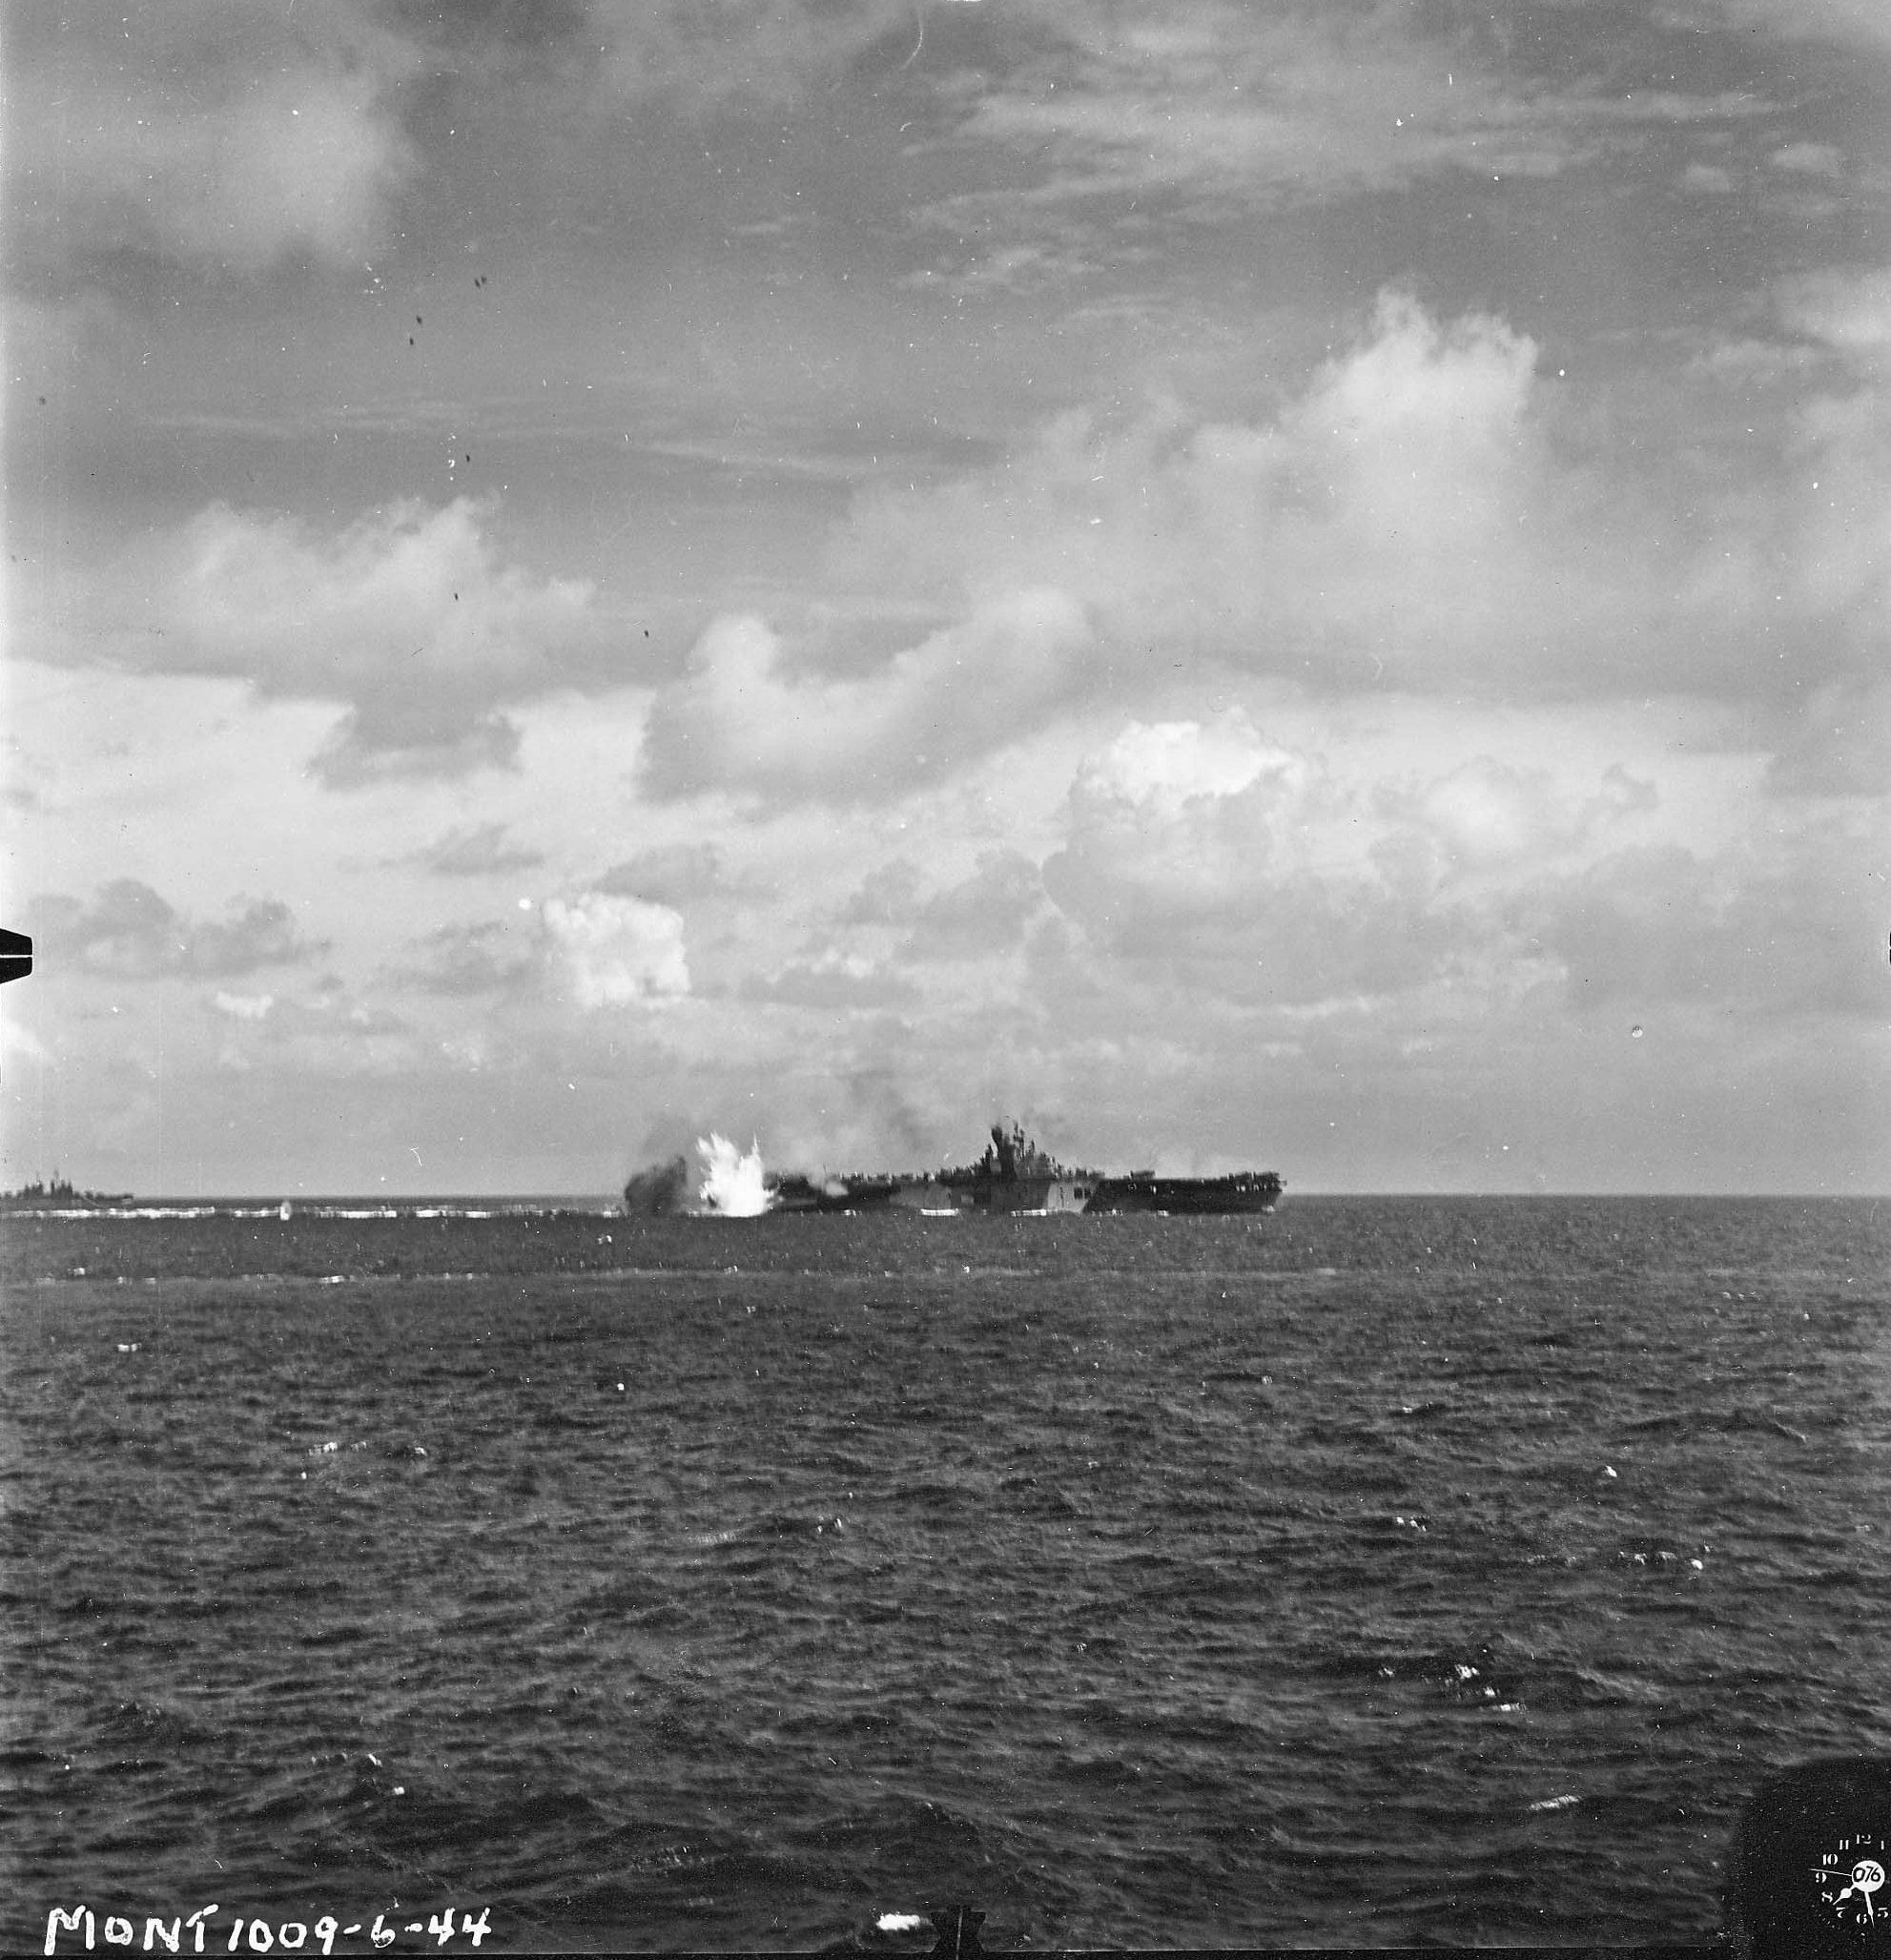 Carrier USS Bunker Hill taking a near miss from a Japanese dive bomber close aboard the starboard quarter, 19 Jun 1944 off Guam, Mariana Islands. The ship was not damaged. Photo 1 of 2